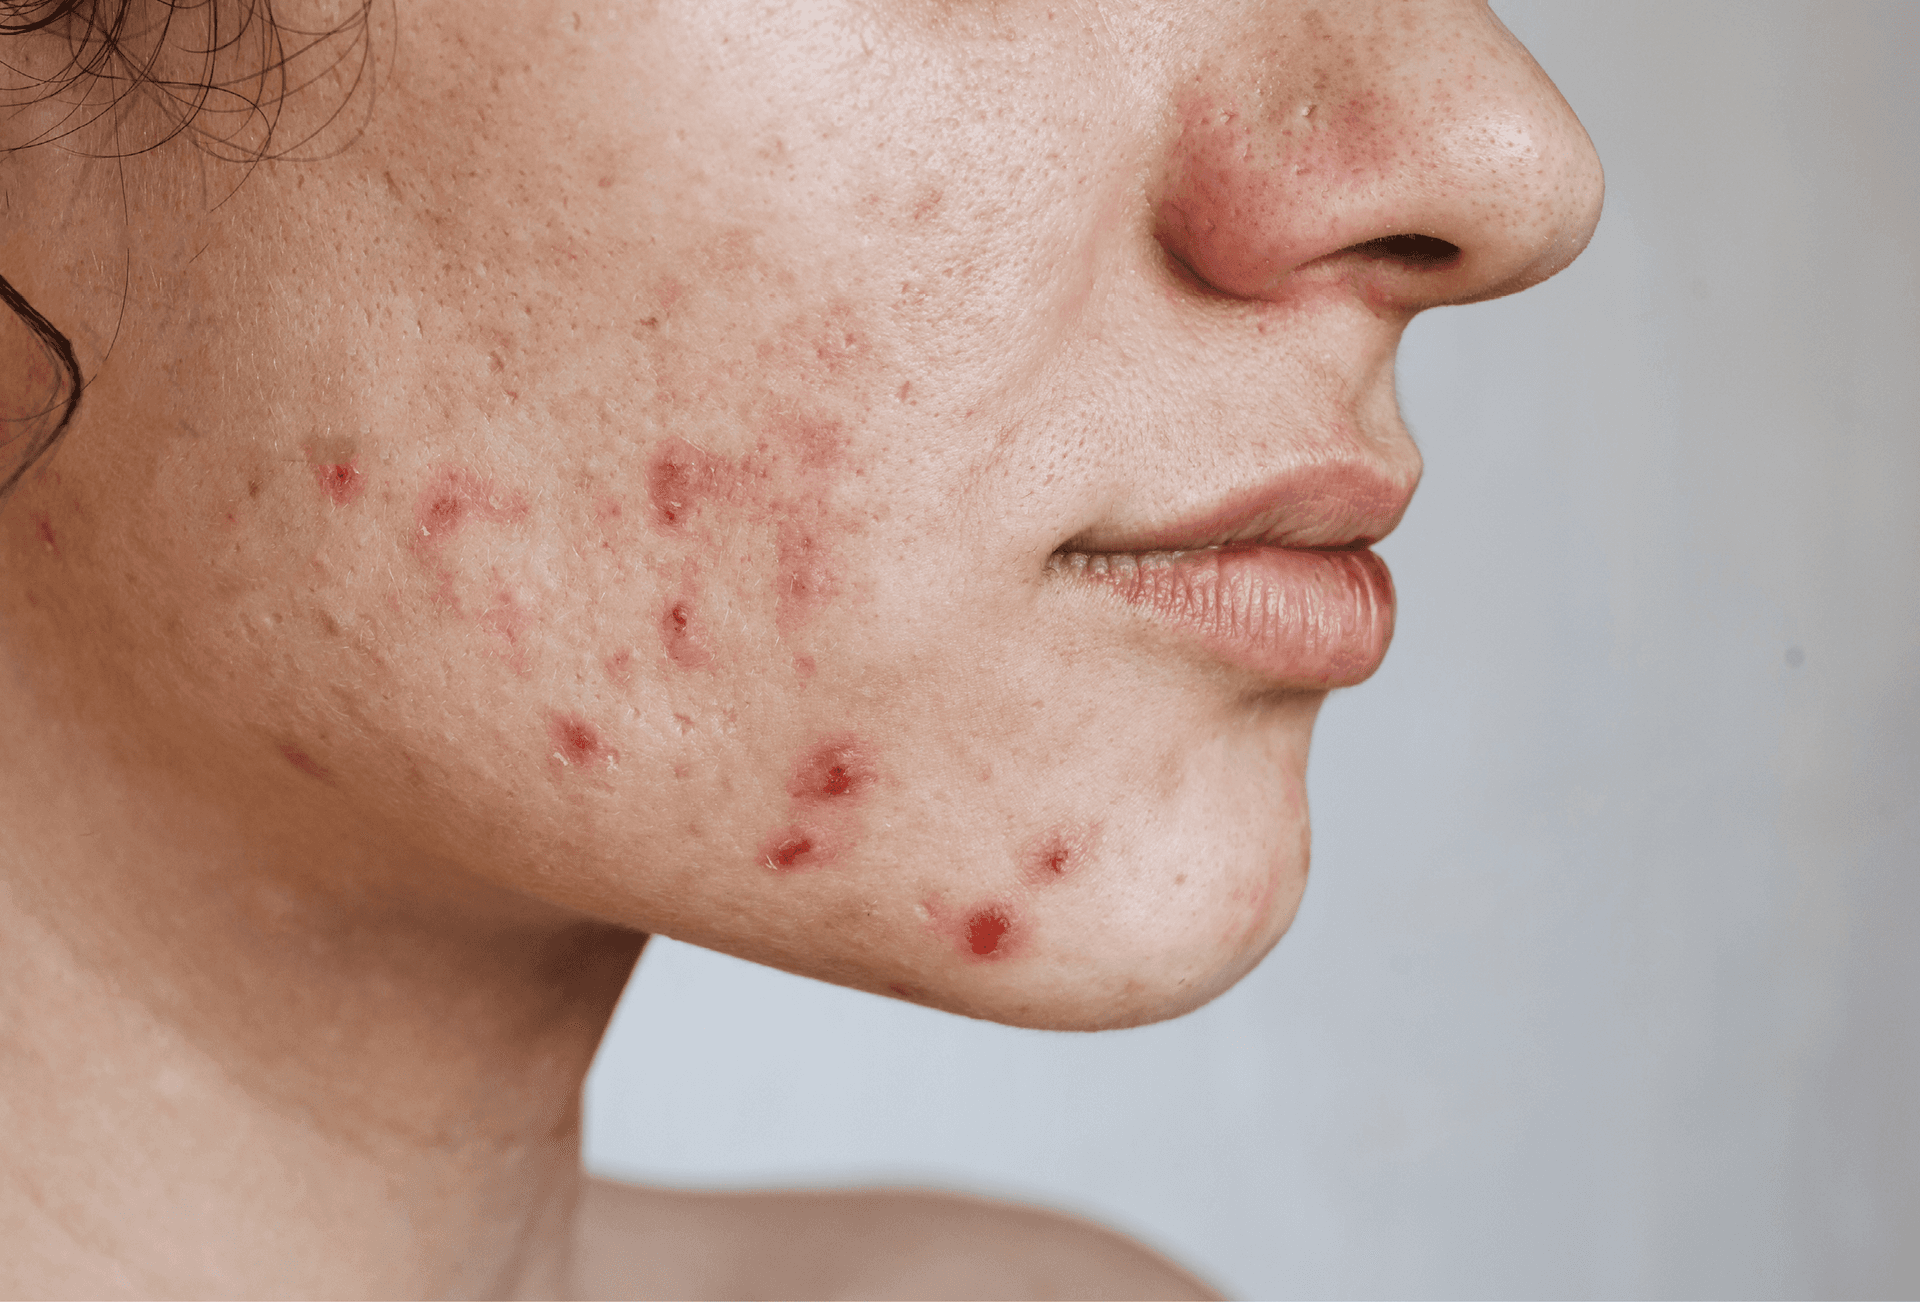 person showing acne on face